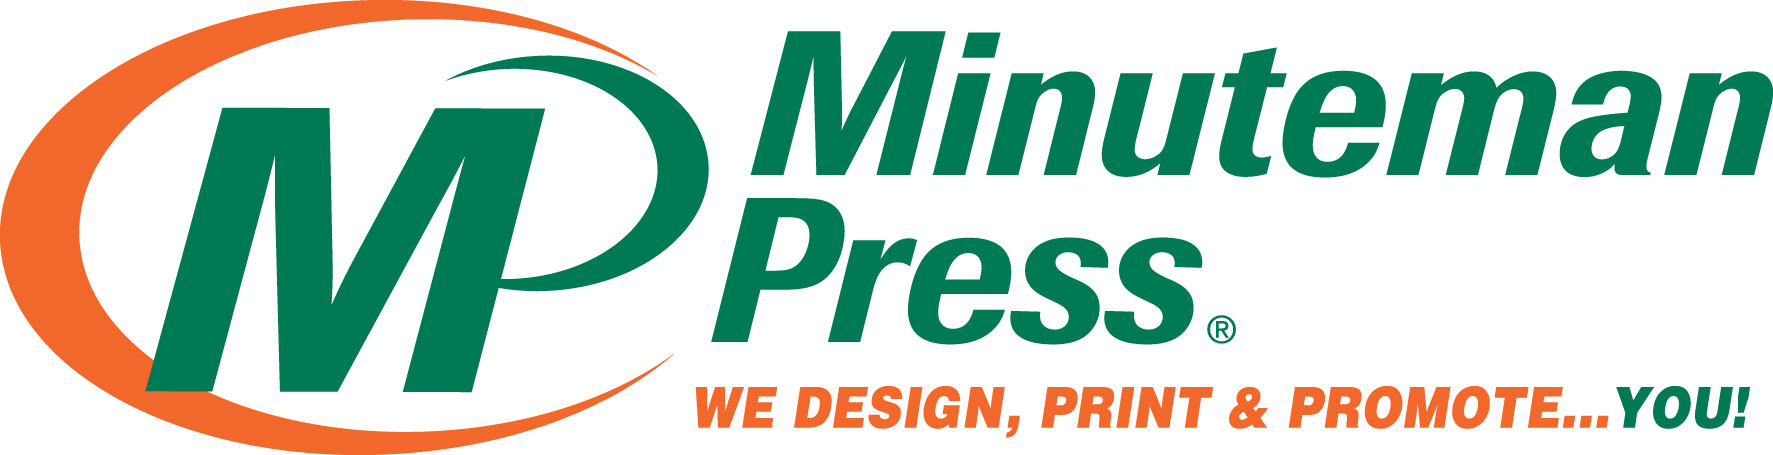 Minuteman Press franchise locations offer a wide range of creative design, digital printing and marketing services to businesses and clients